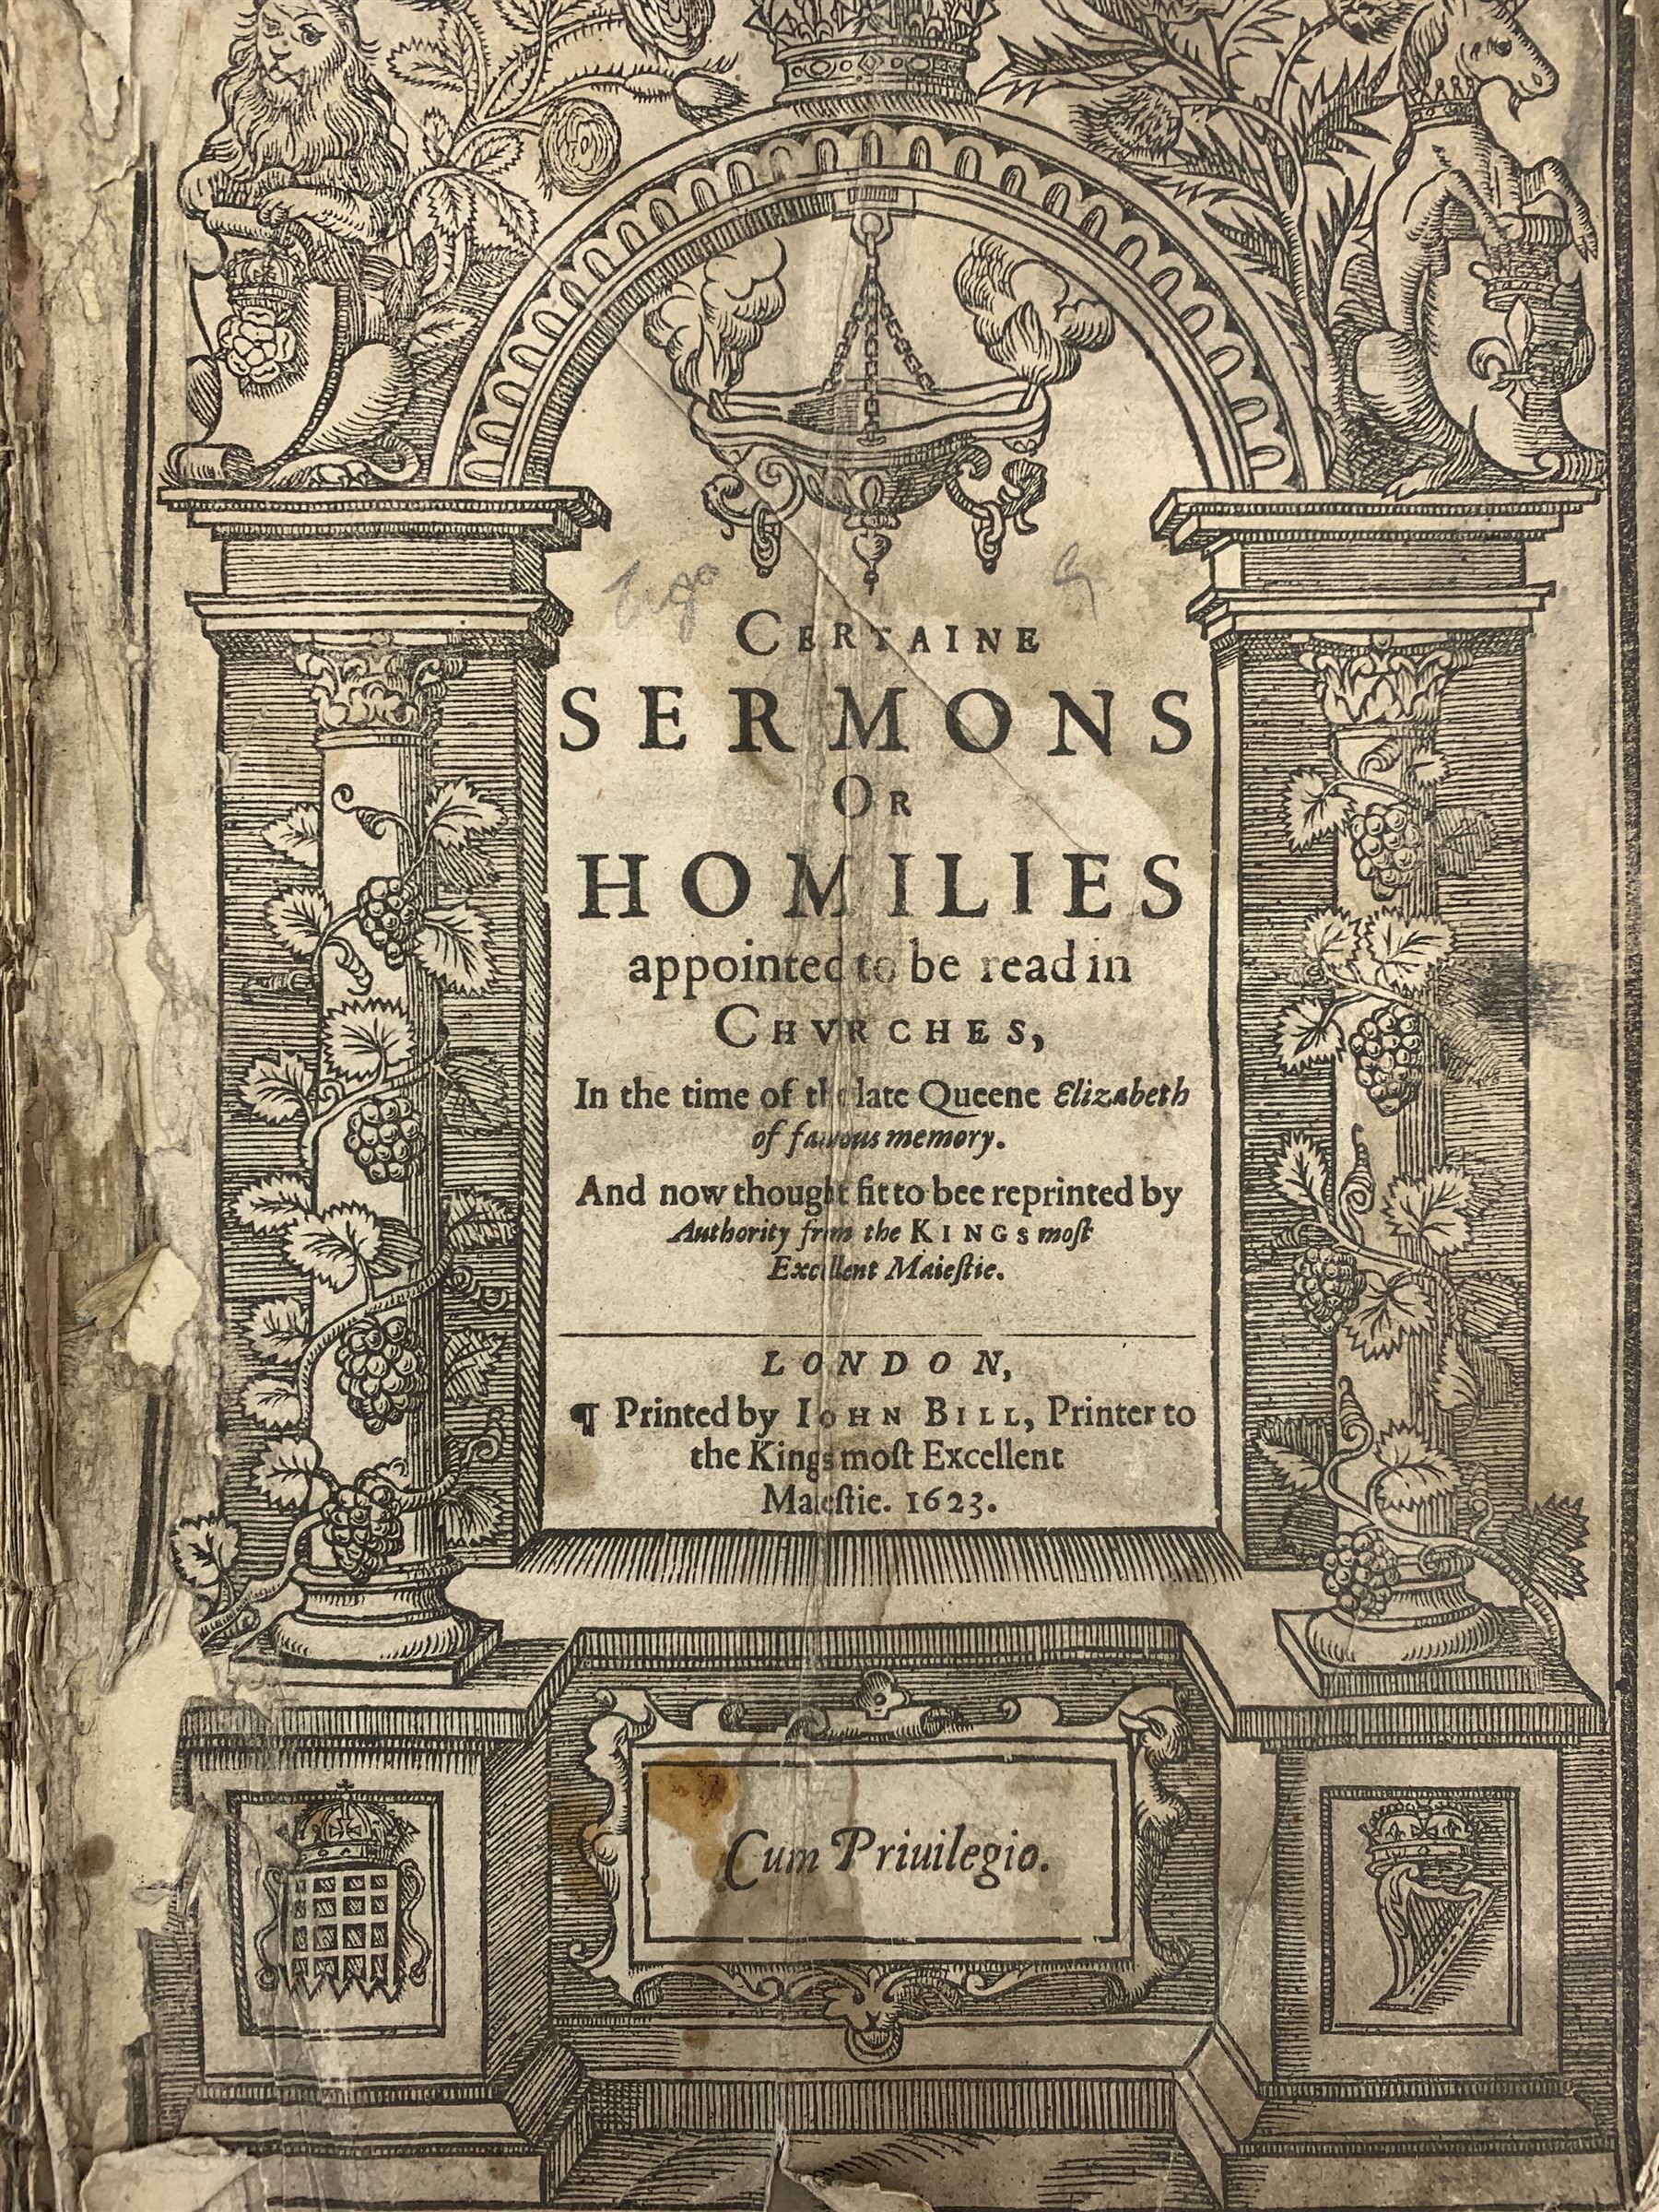 Certain Sermons or Homilies appointed to be read in Churches............ printed by John Bill 1623 a - Image 5 of 5